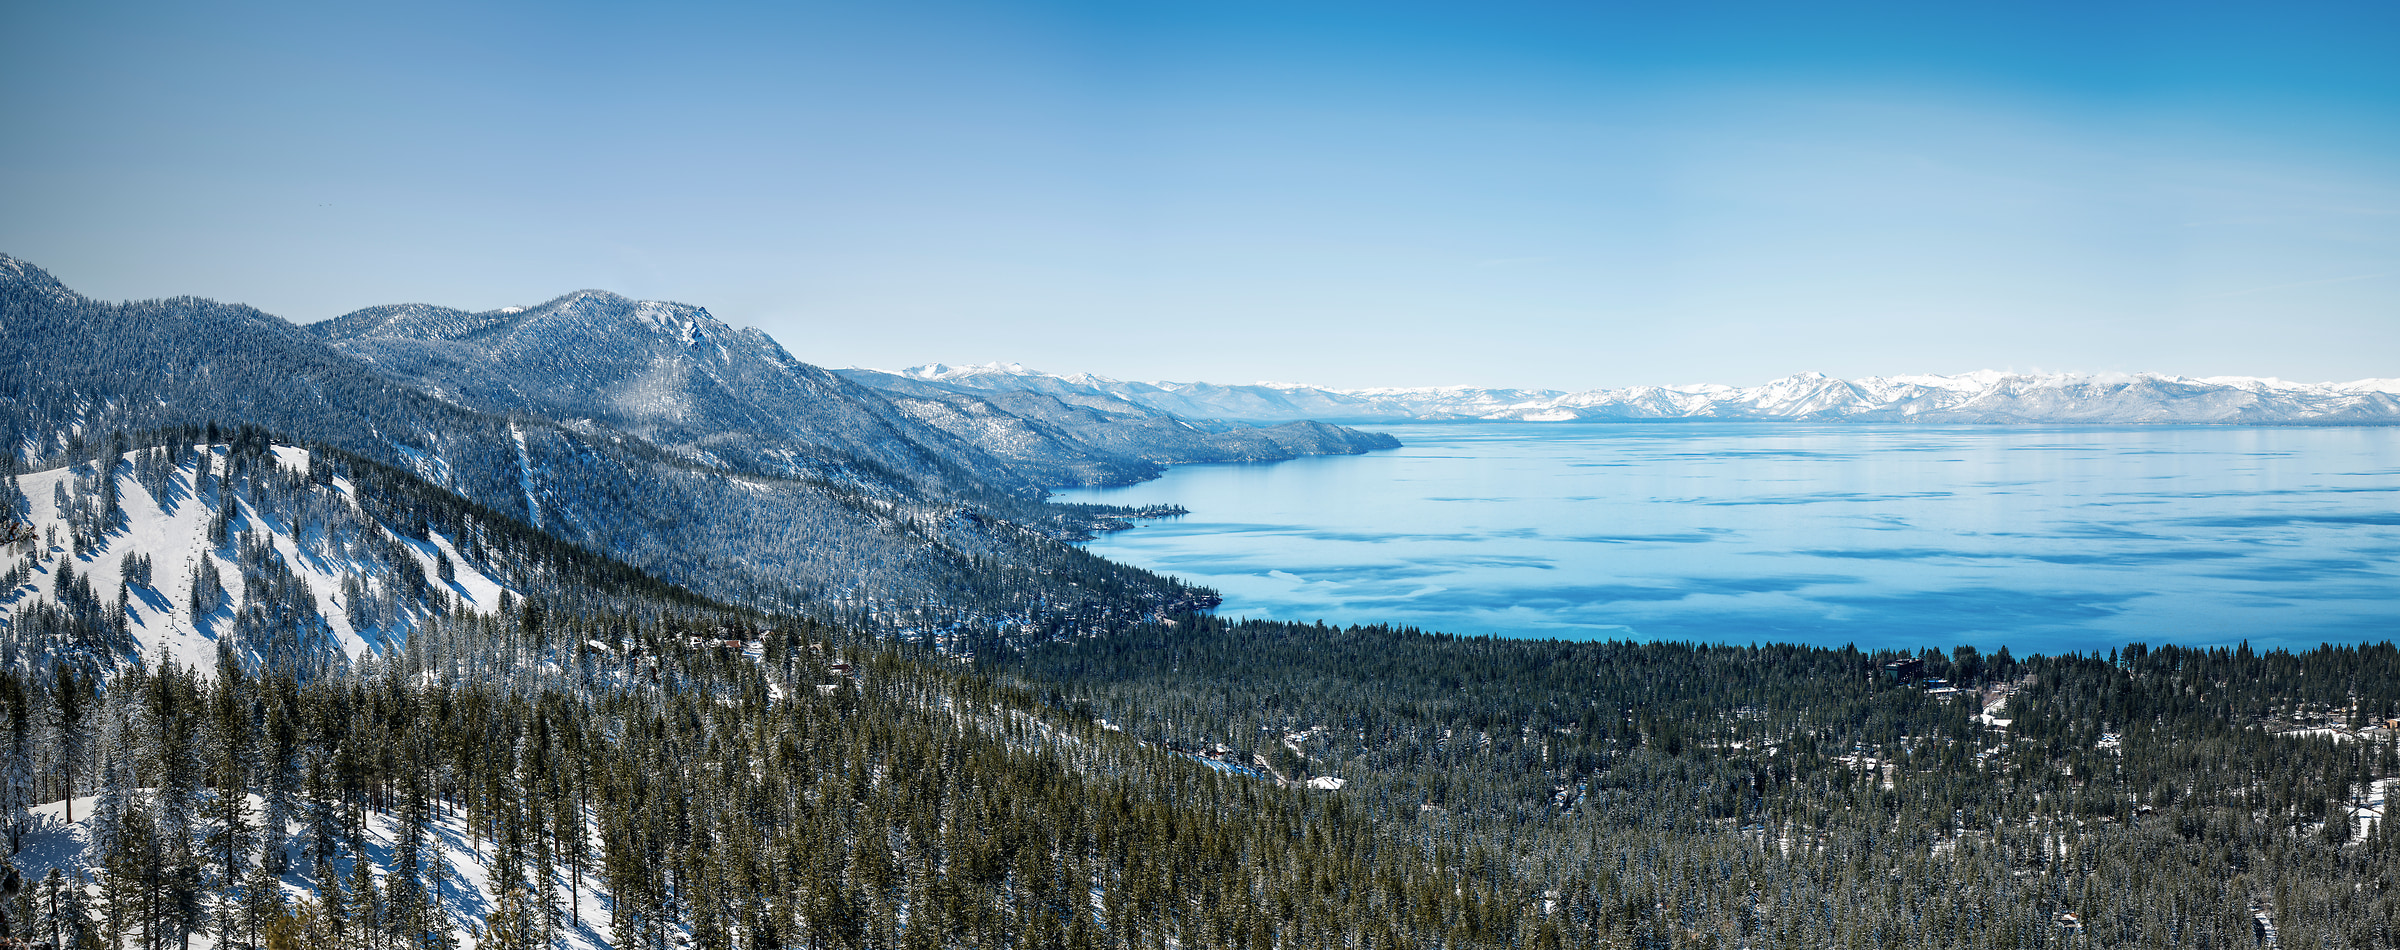 286 megapixels! A very high resolution, large-format VAST photo of Lake Tahoe in winter with snow; fine art landscape photograph created by Justin Katz from Mount Rose Highway in Nevada